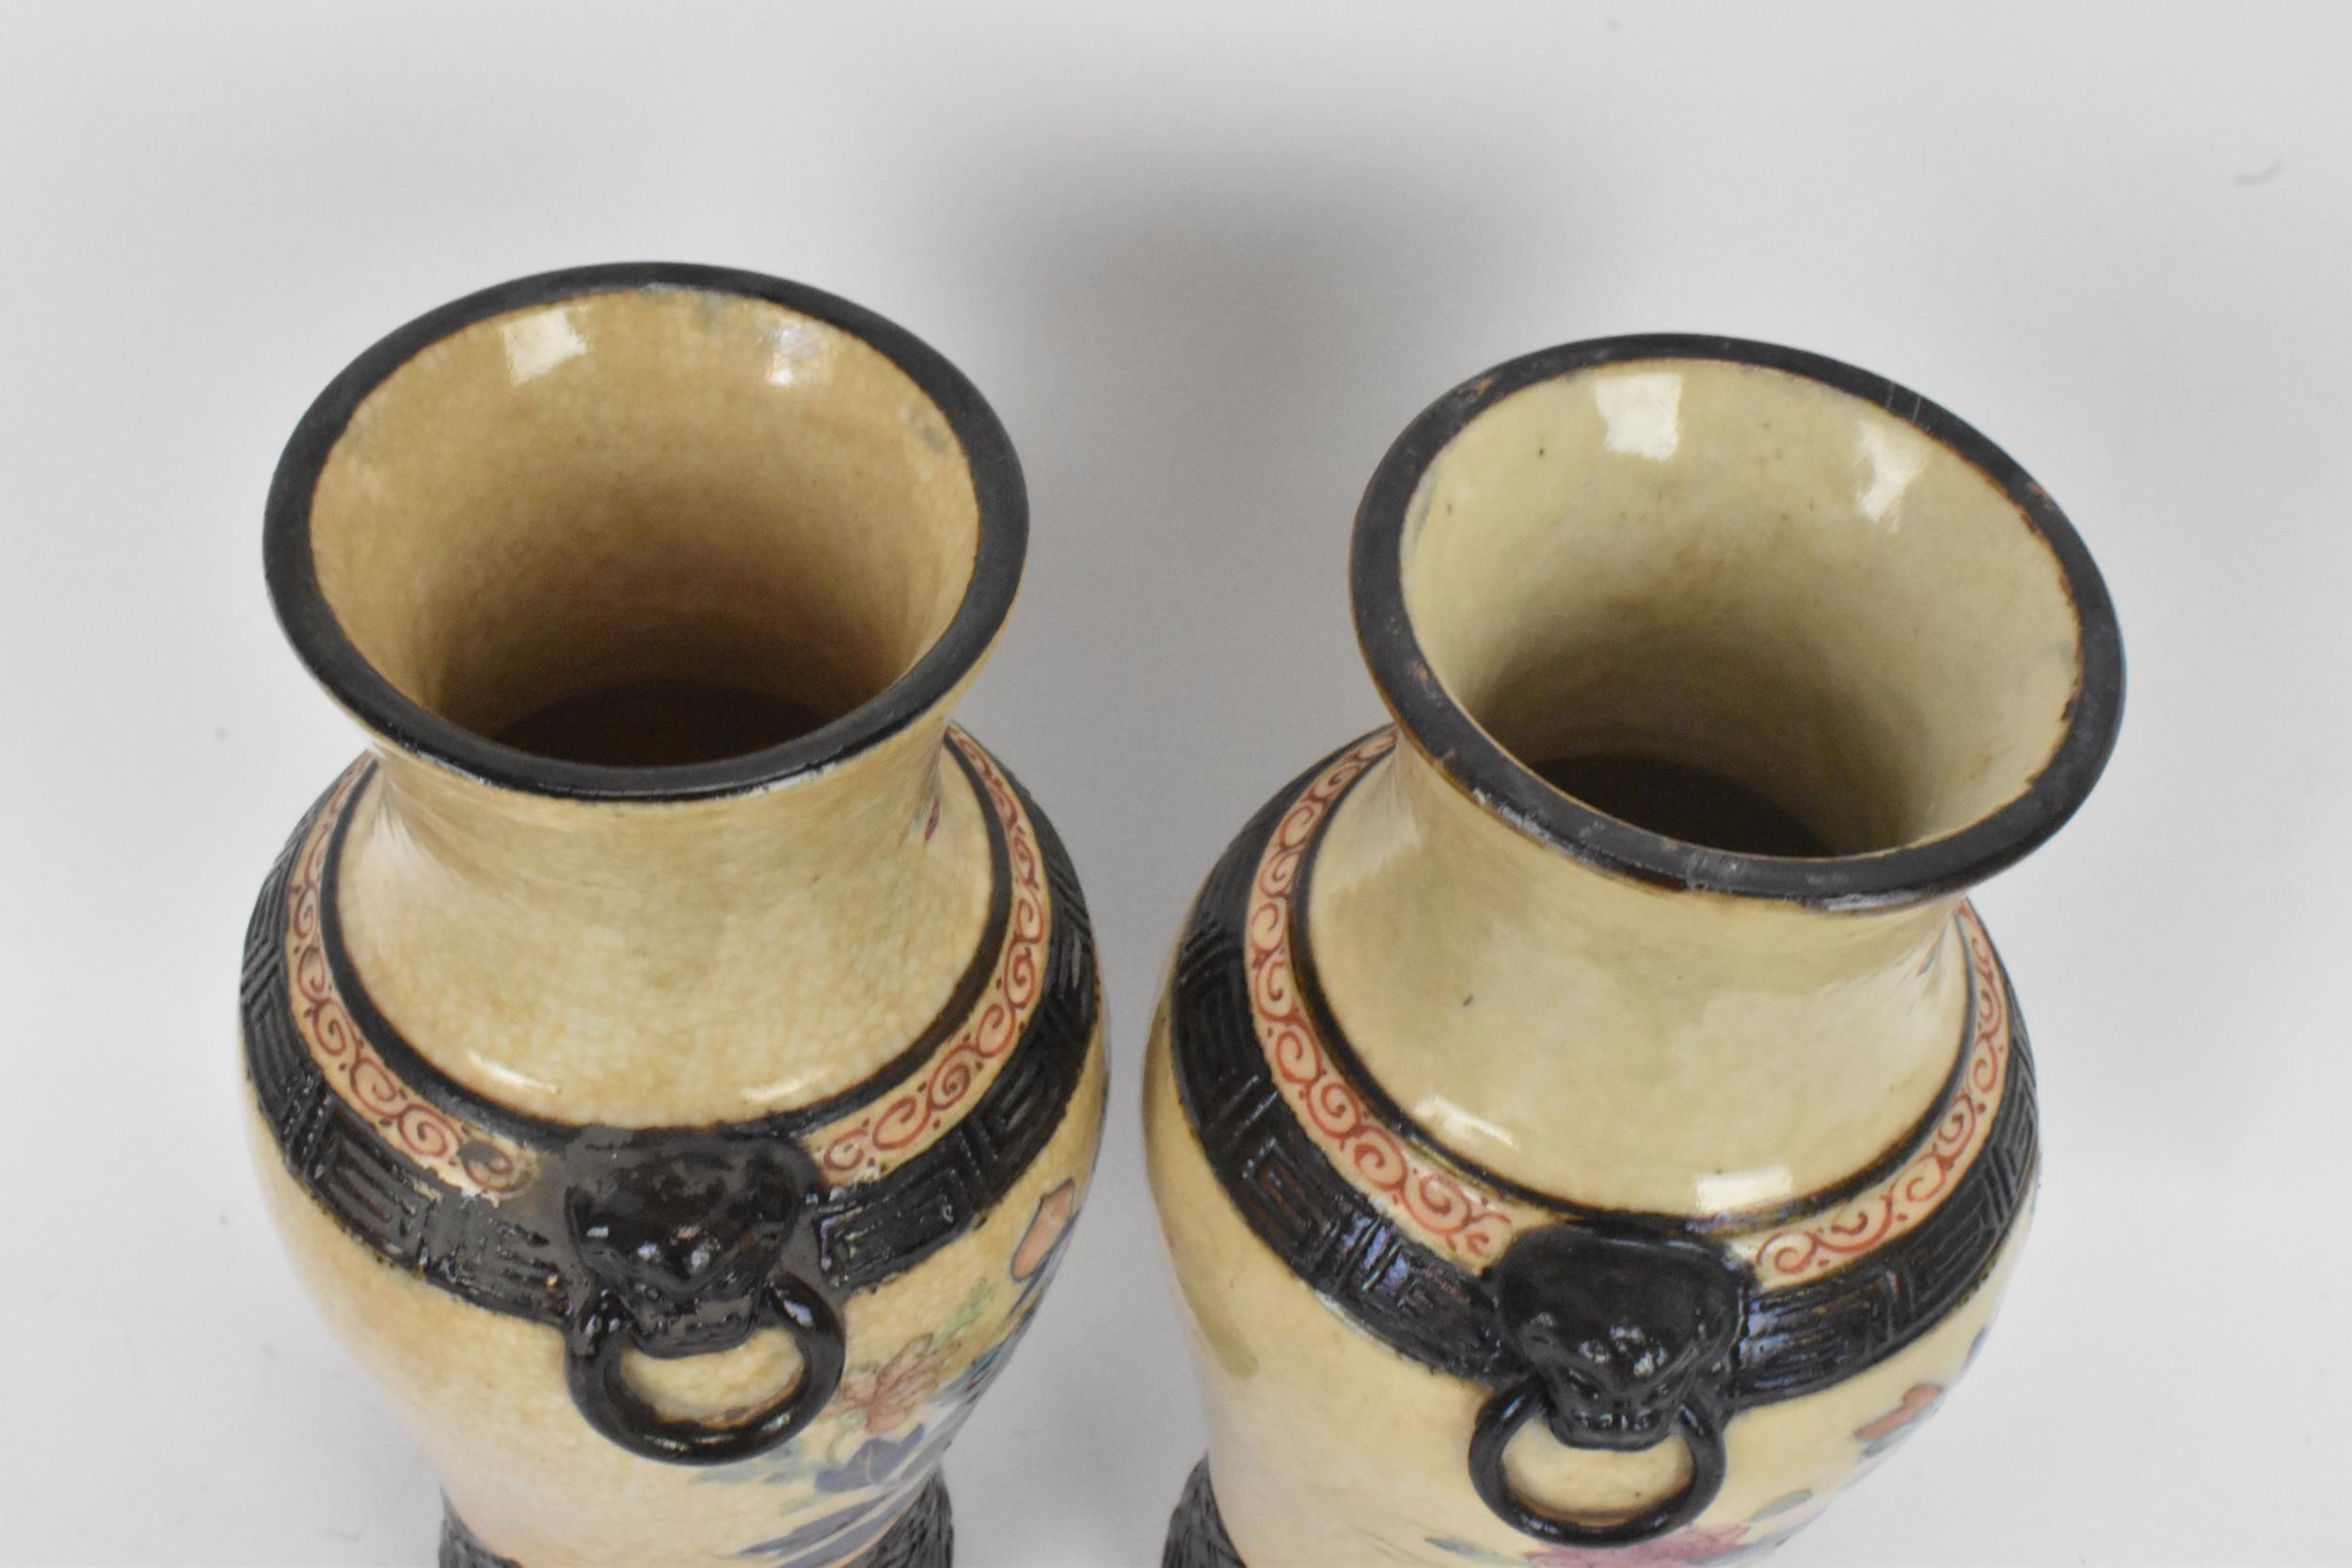 A pair of Chinese Nanking crackle glazed vases, Qing dynasty, late 19th century, baluster form - Image 5 of 7